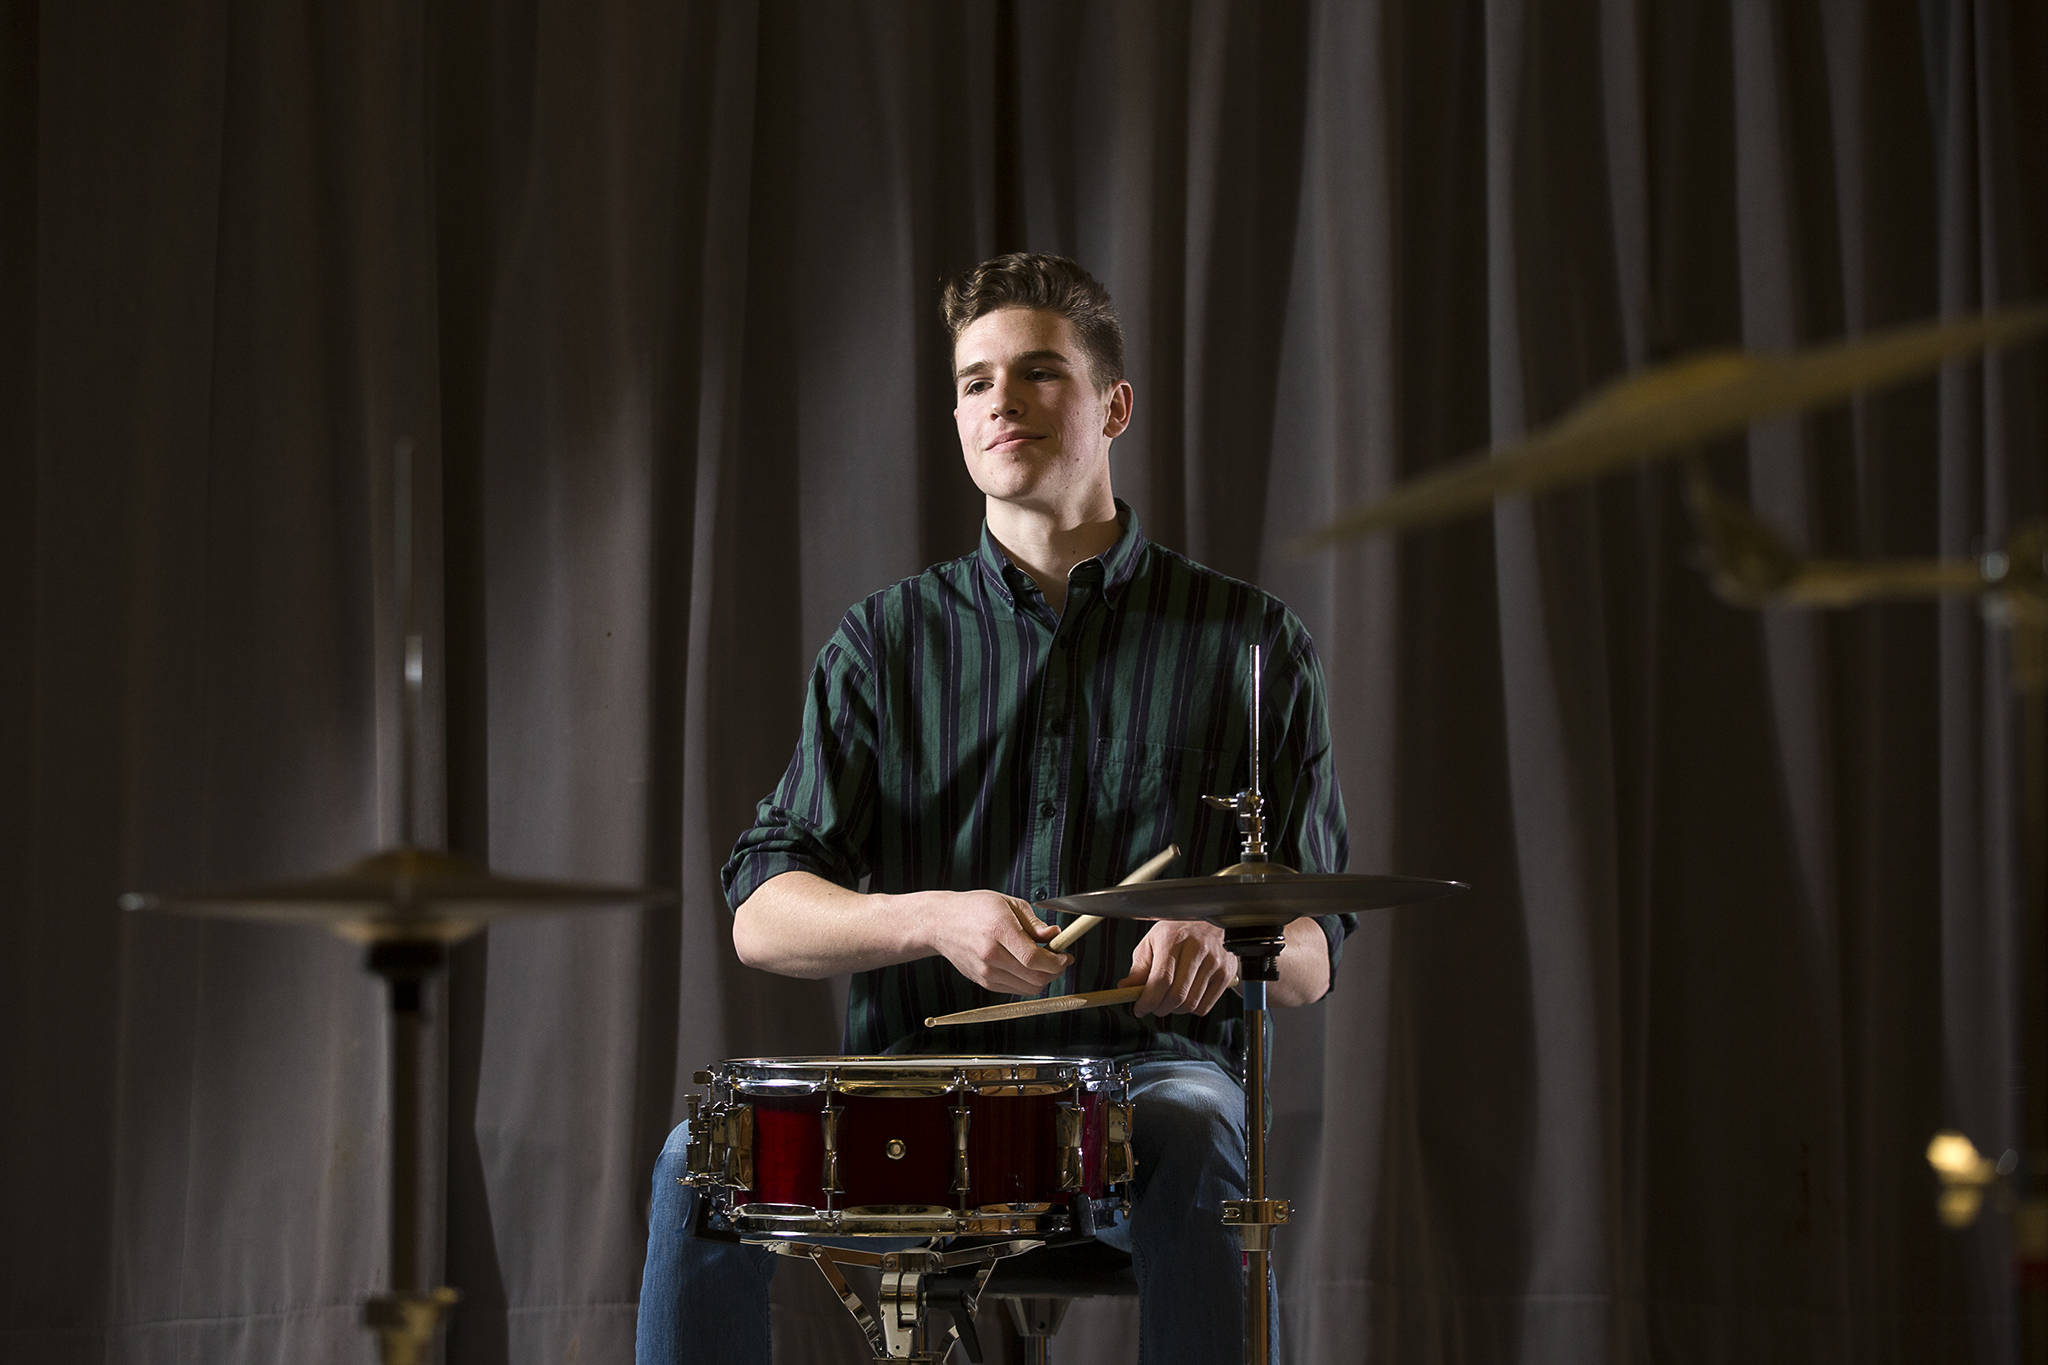 Mountlake Terrace senior Josh Setala, the “tall guy who plays drums,” has applied to study music at San Francisco Conservatory, the University of Washington and DePaul University in Chicago. (Andy Bronson / The Herald)